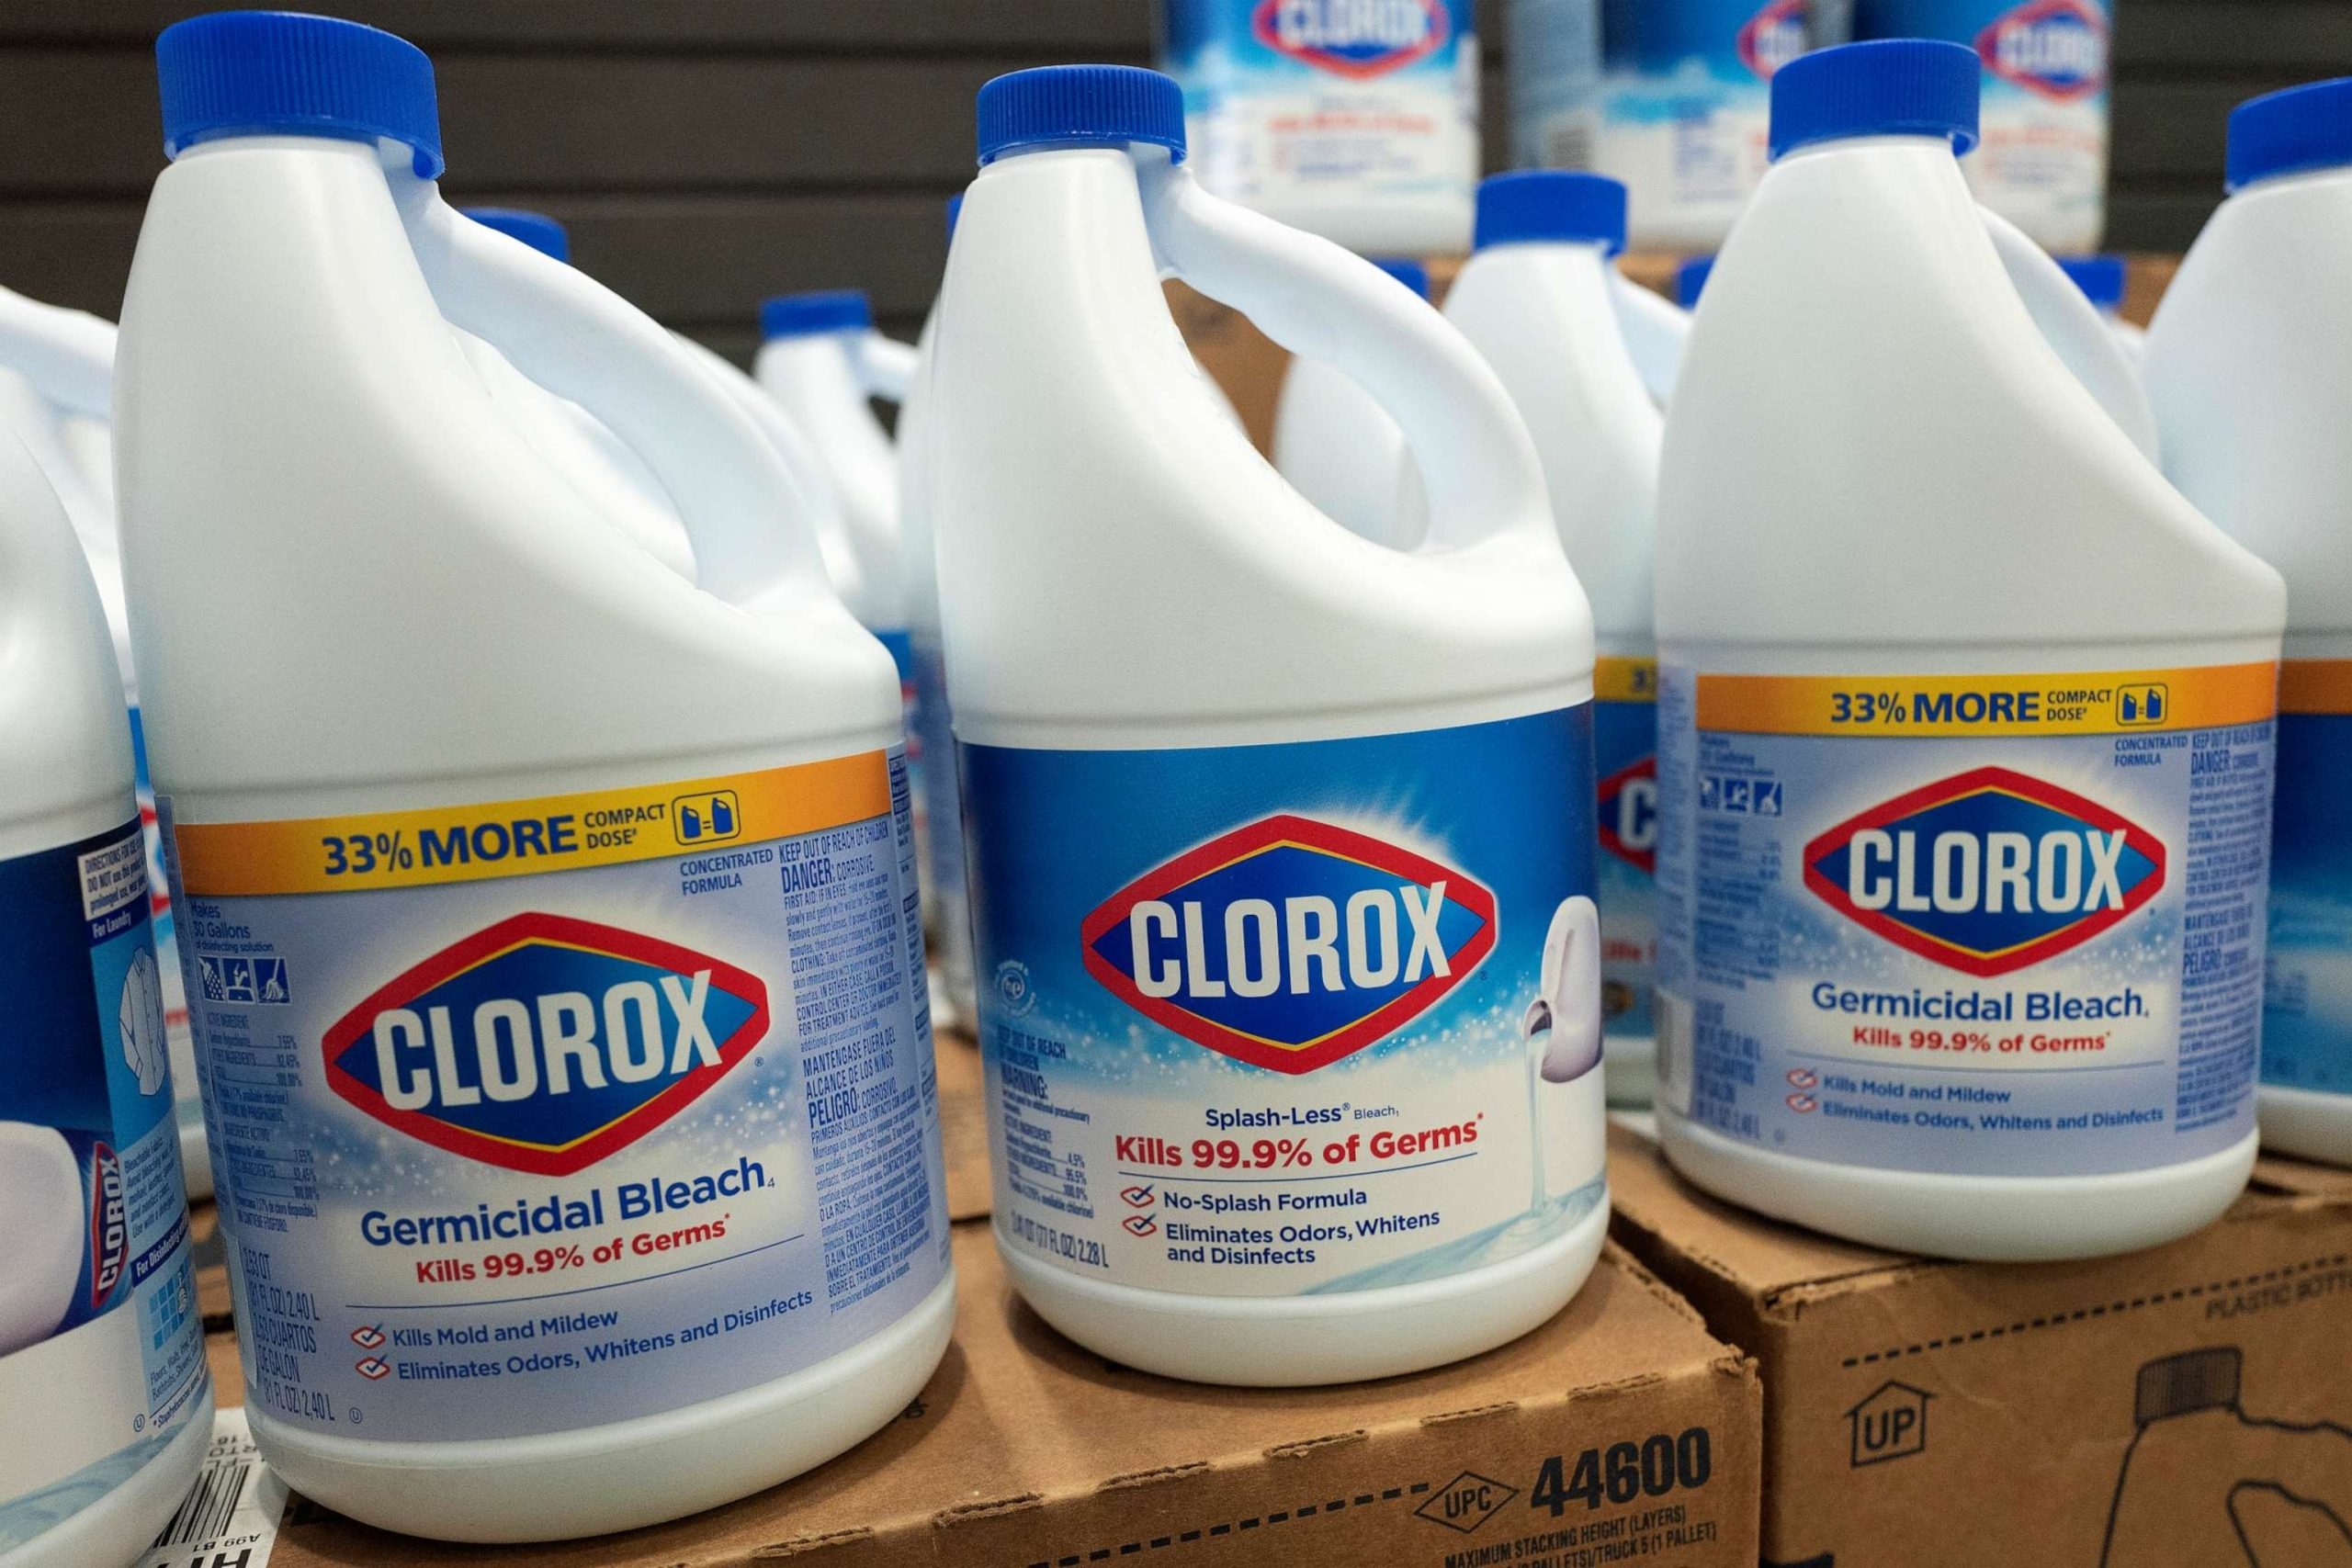 Clorox cautions about potential product delays and shortages due to cyberattack